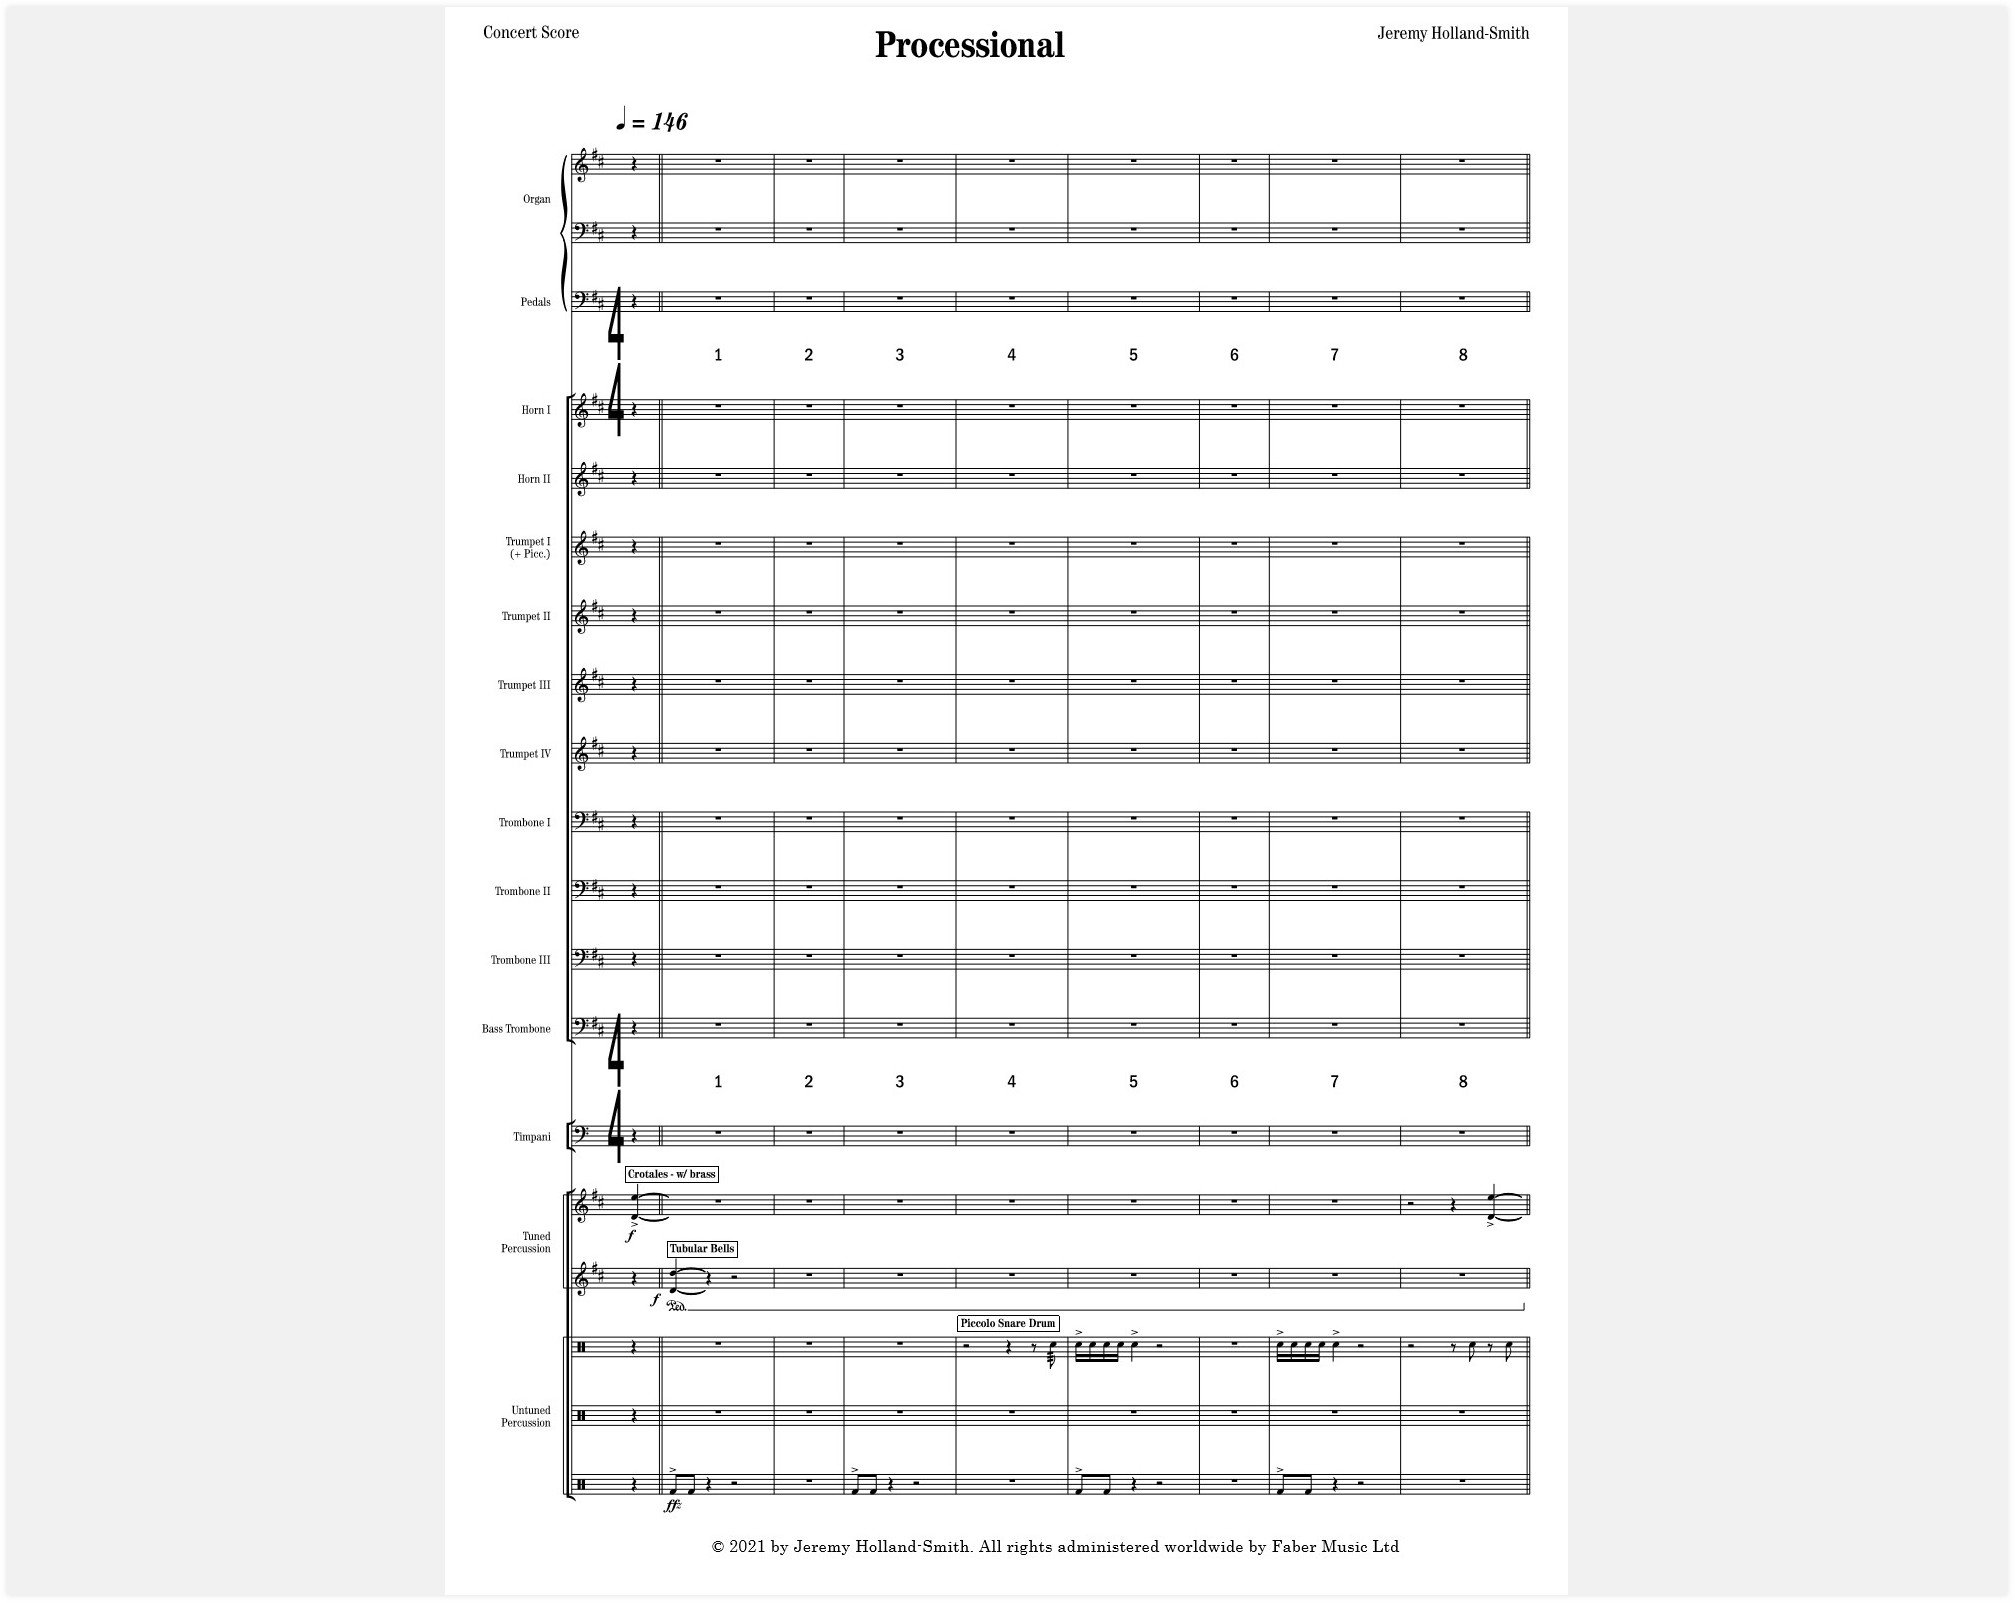 Processional and Recessional (Faber) - Concert Score_3.jpg